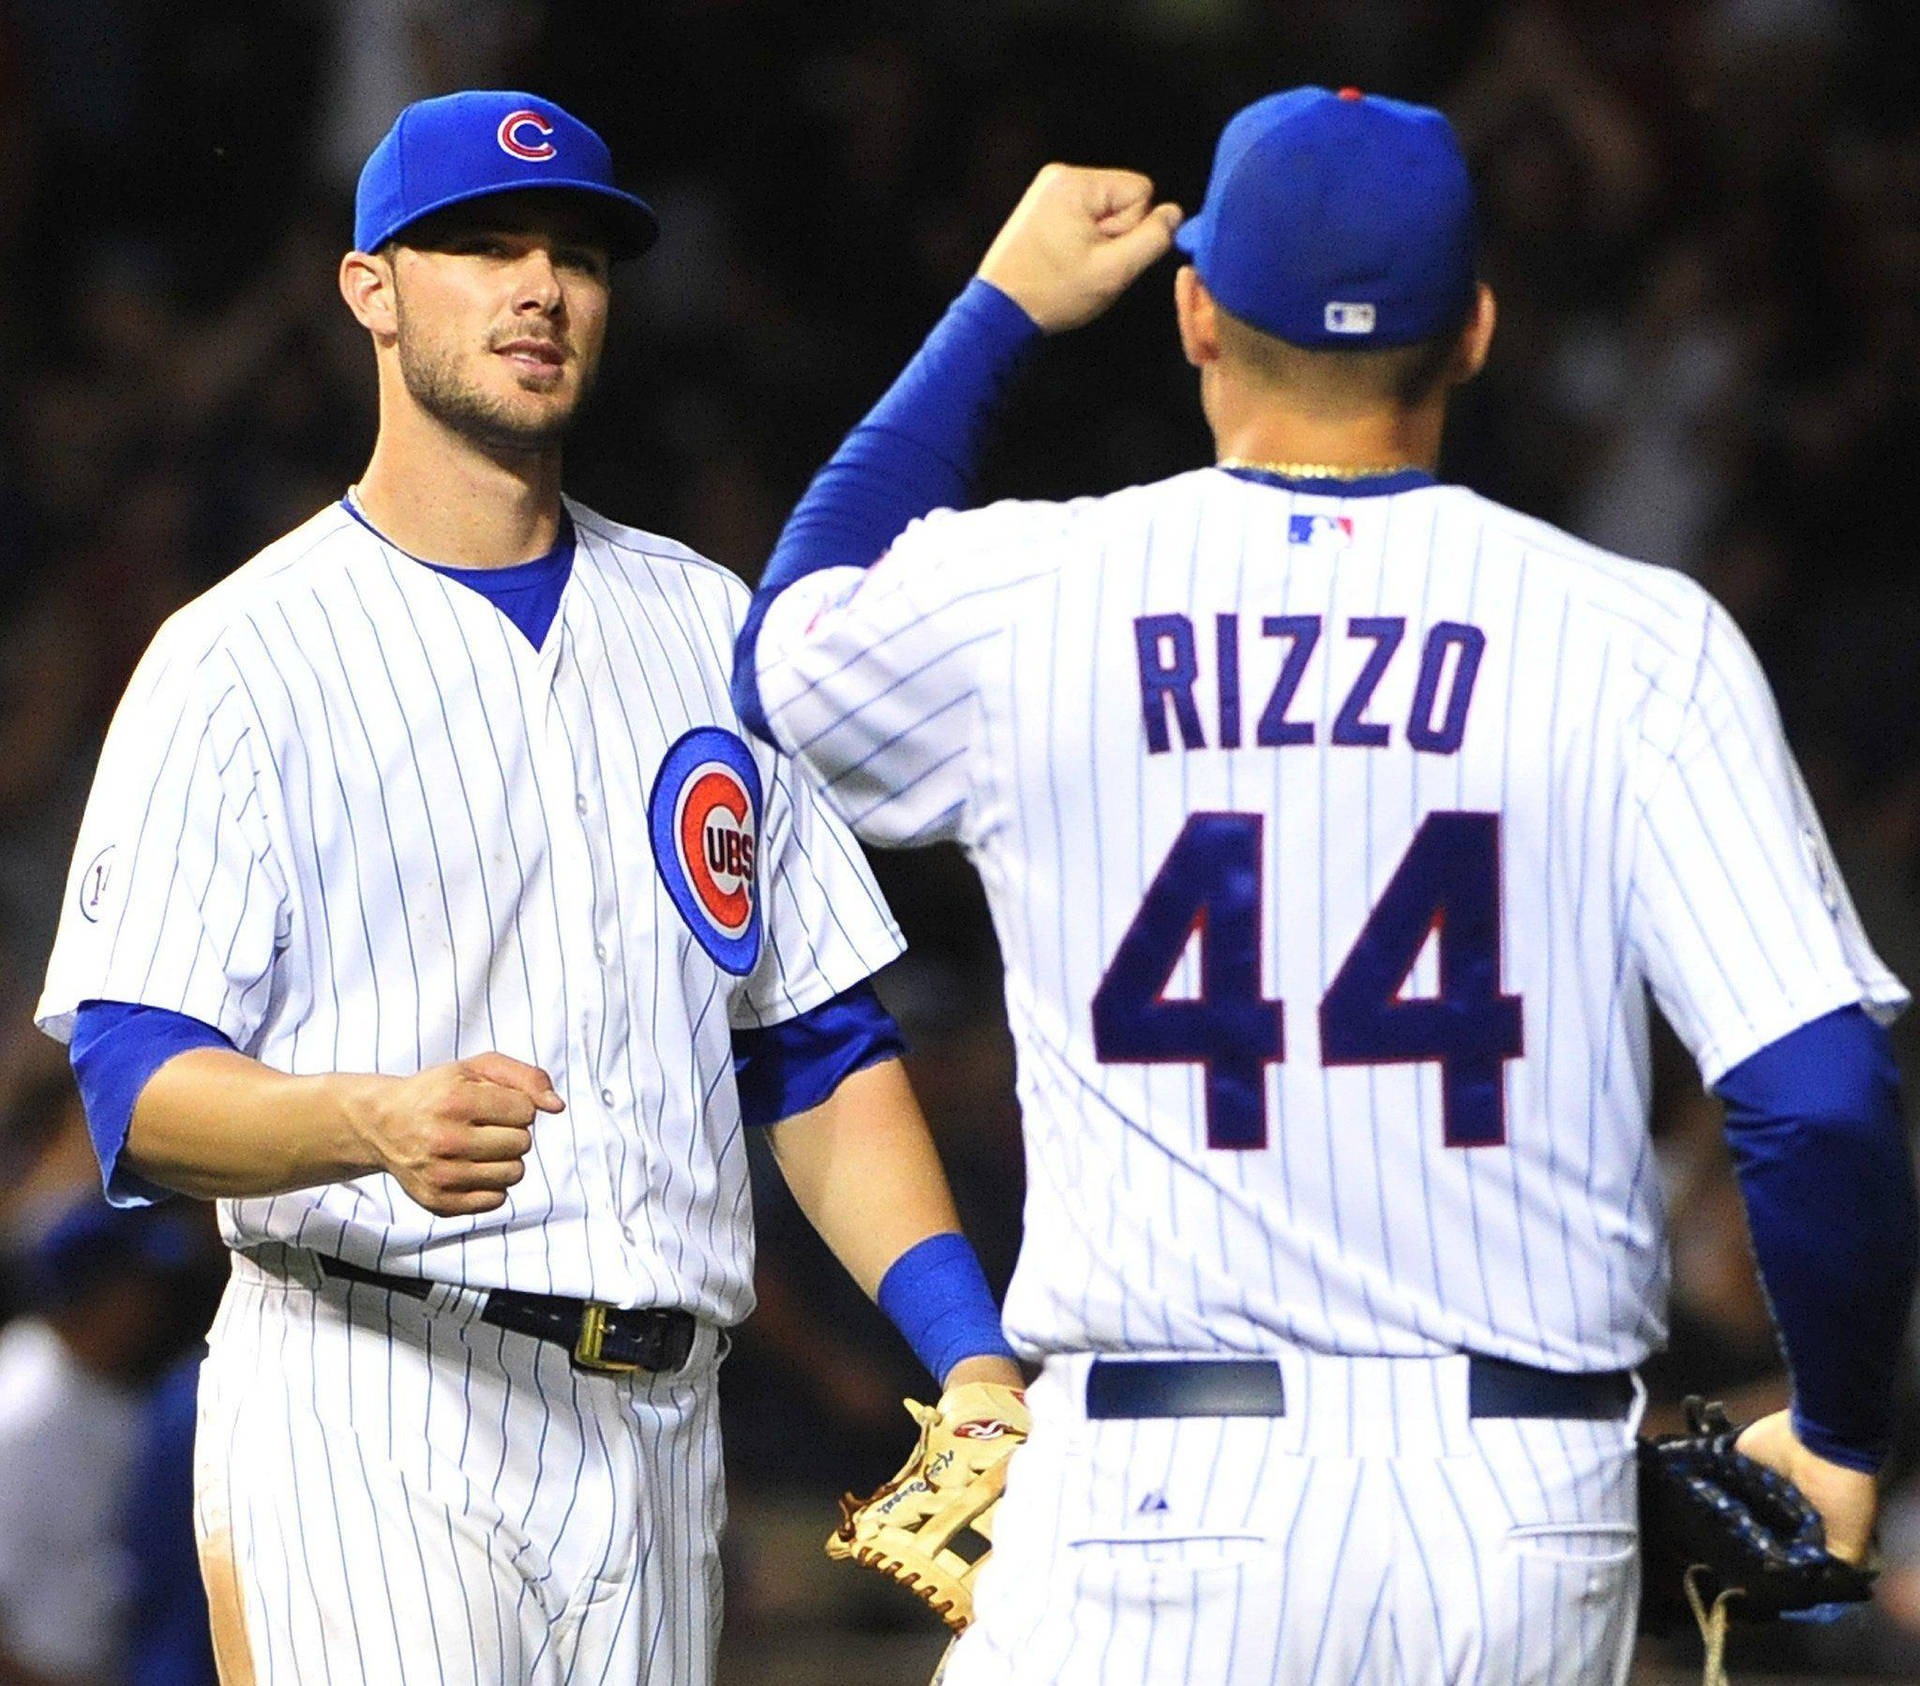 Download Kris Bryant Fist Bumping With Rizzo Wallpaper